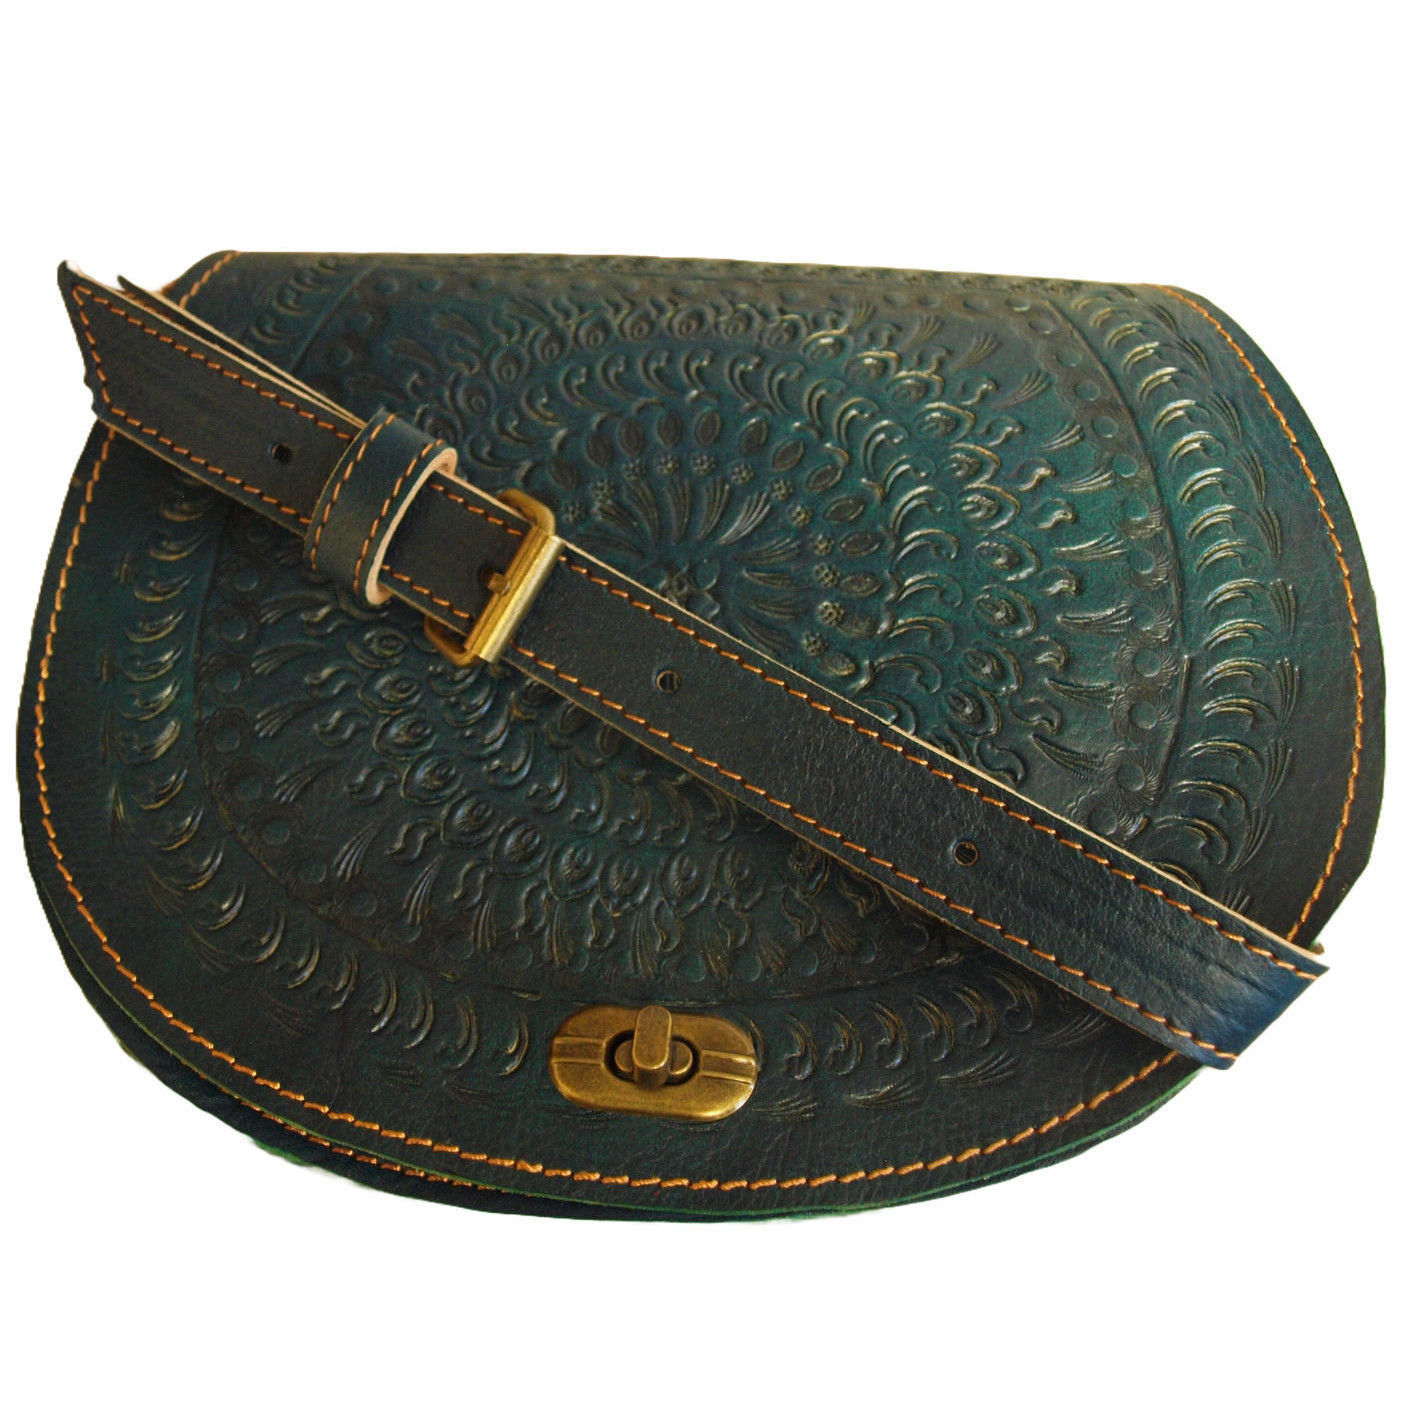 Teal Embossed Saddle Bag with Strap on Front on White Background